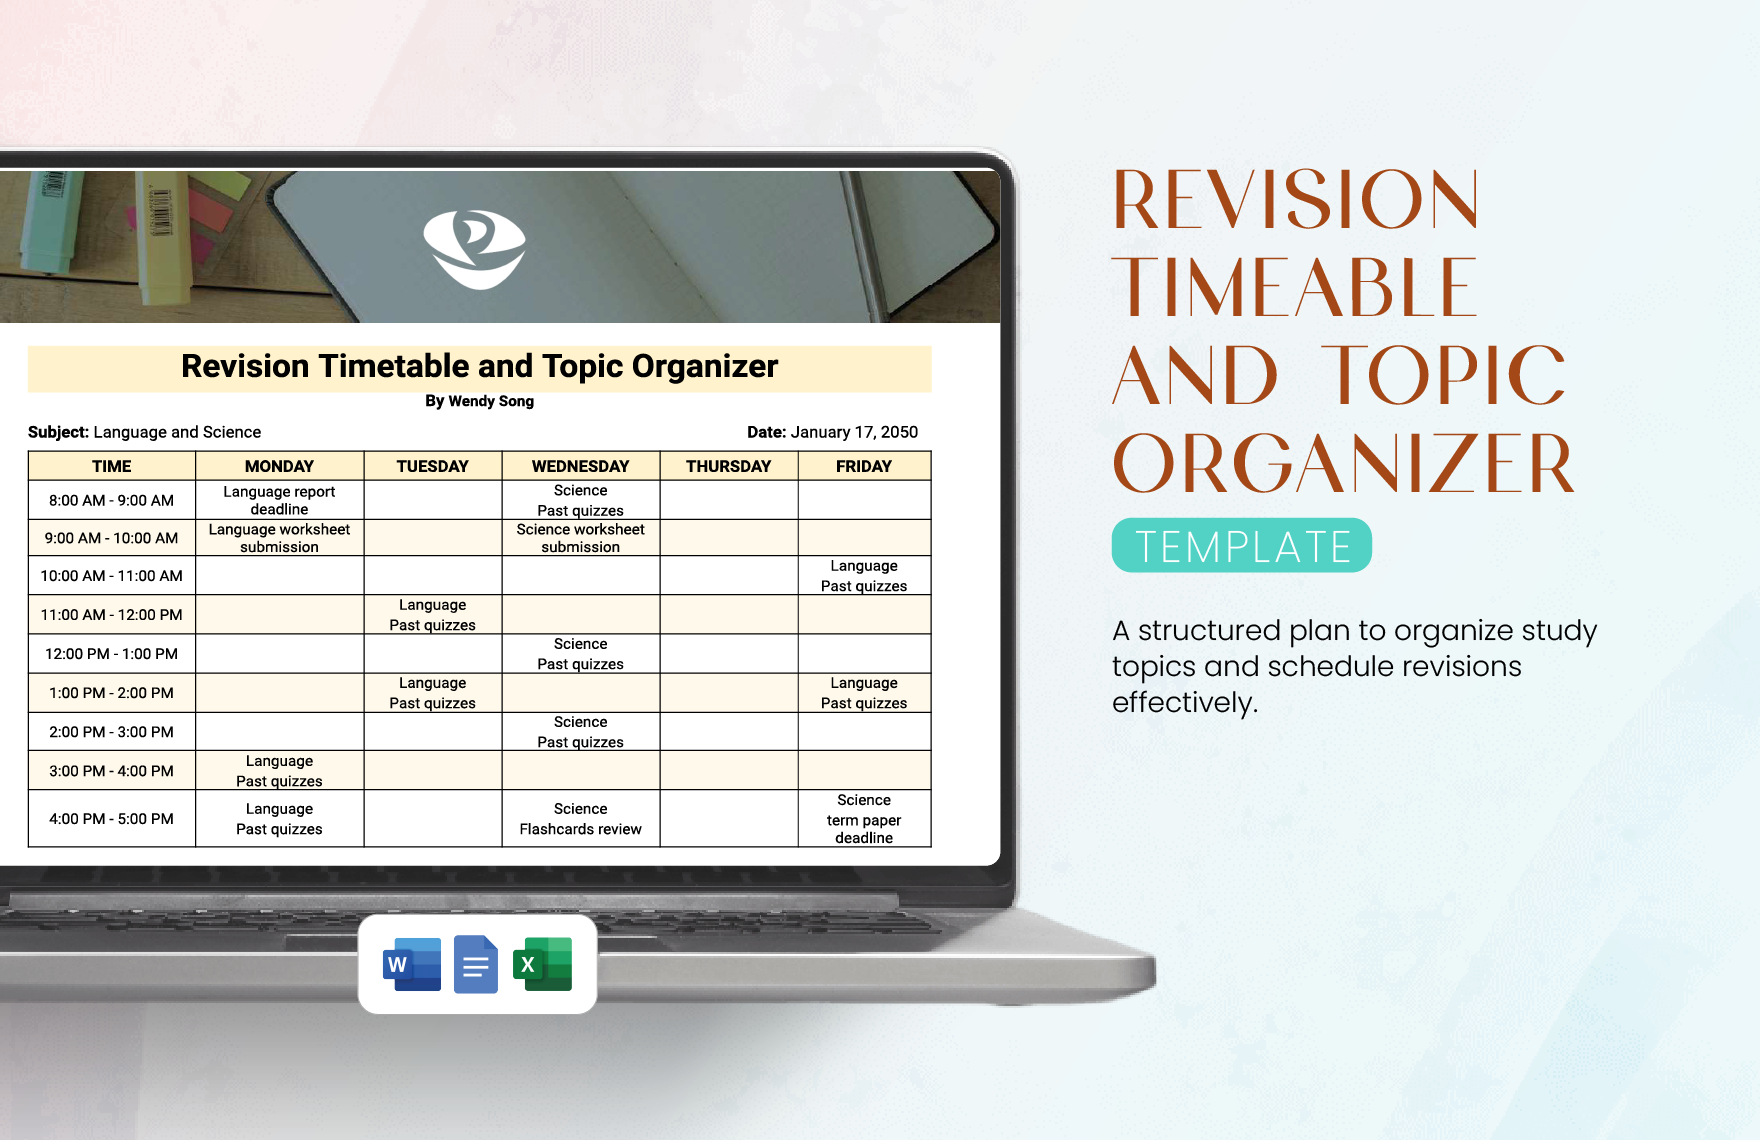 Revision Timetable And Topic Organizer Template in Word, Google Docs, Excel